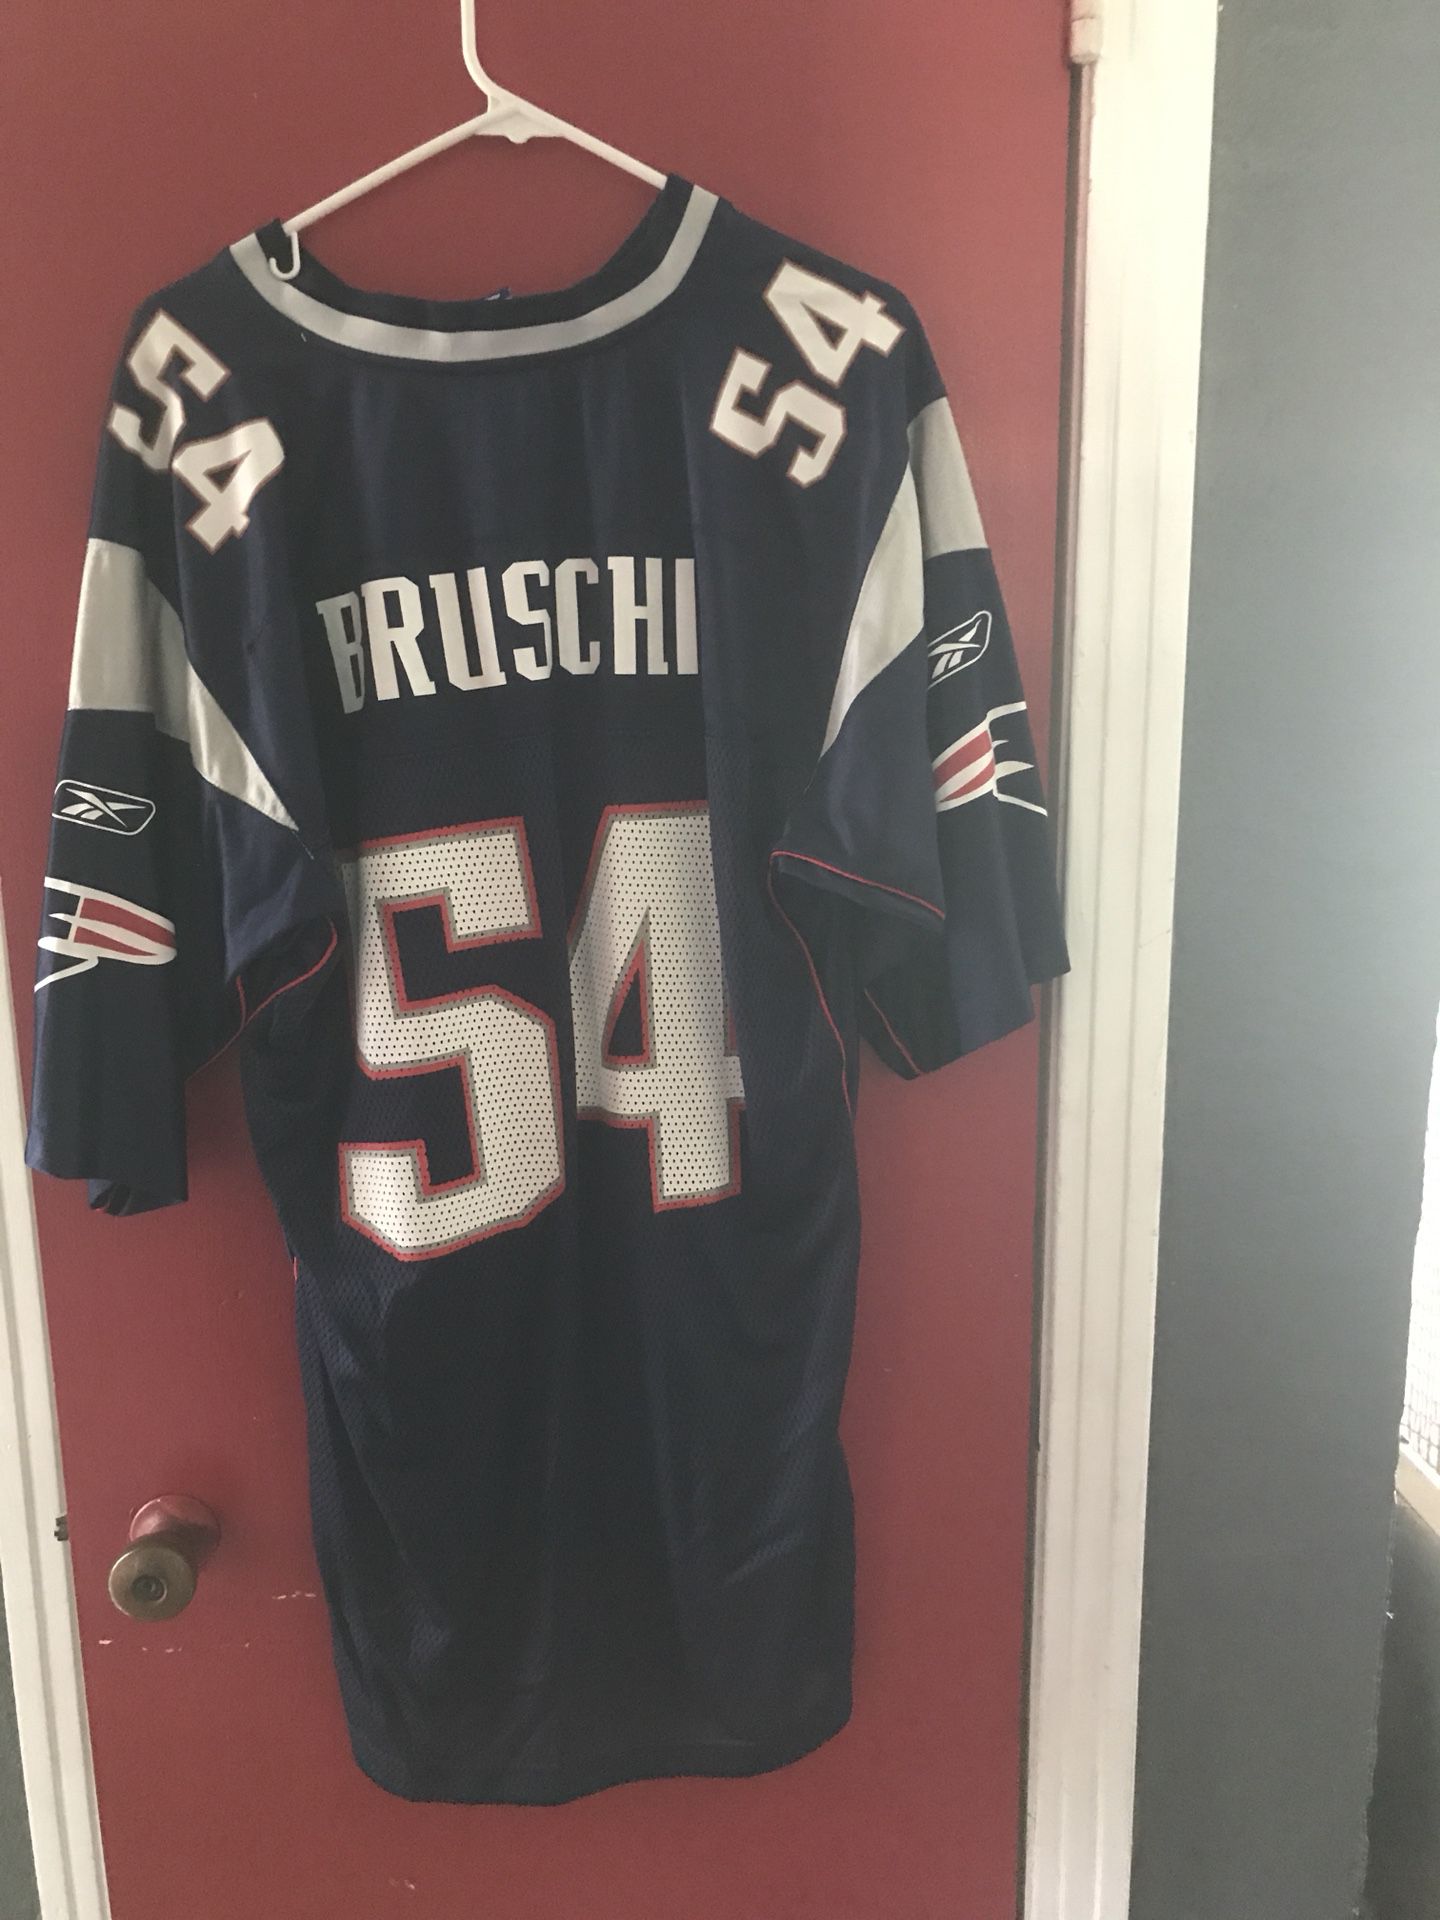 Official Nfl jersey. Patriots. Adult large Bruschi